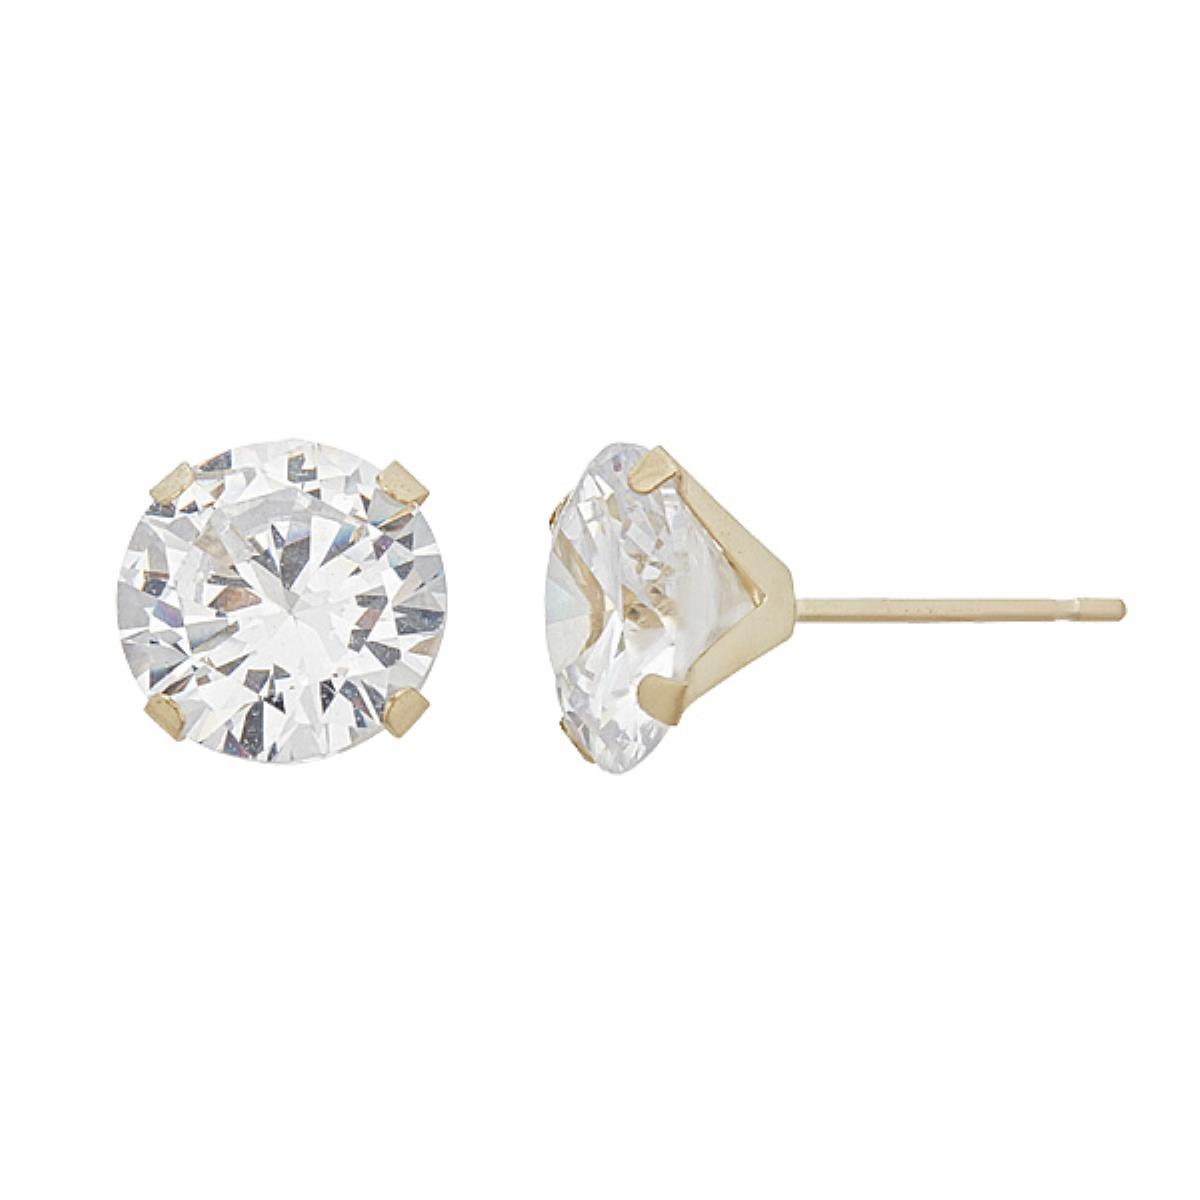 14K Yellow Gold 10mm Martini Round Cut Solitaire Stud Earring